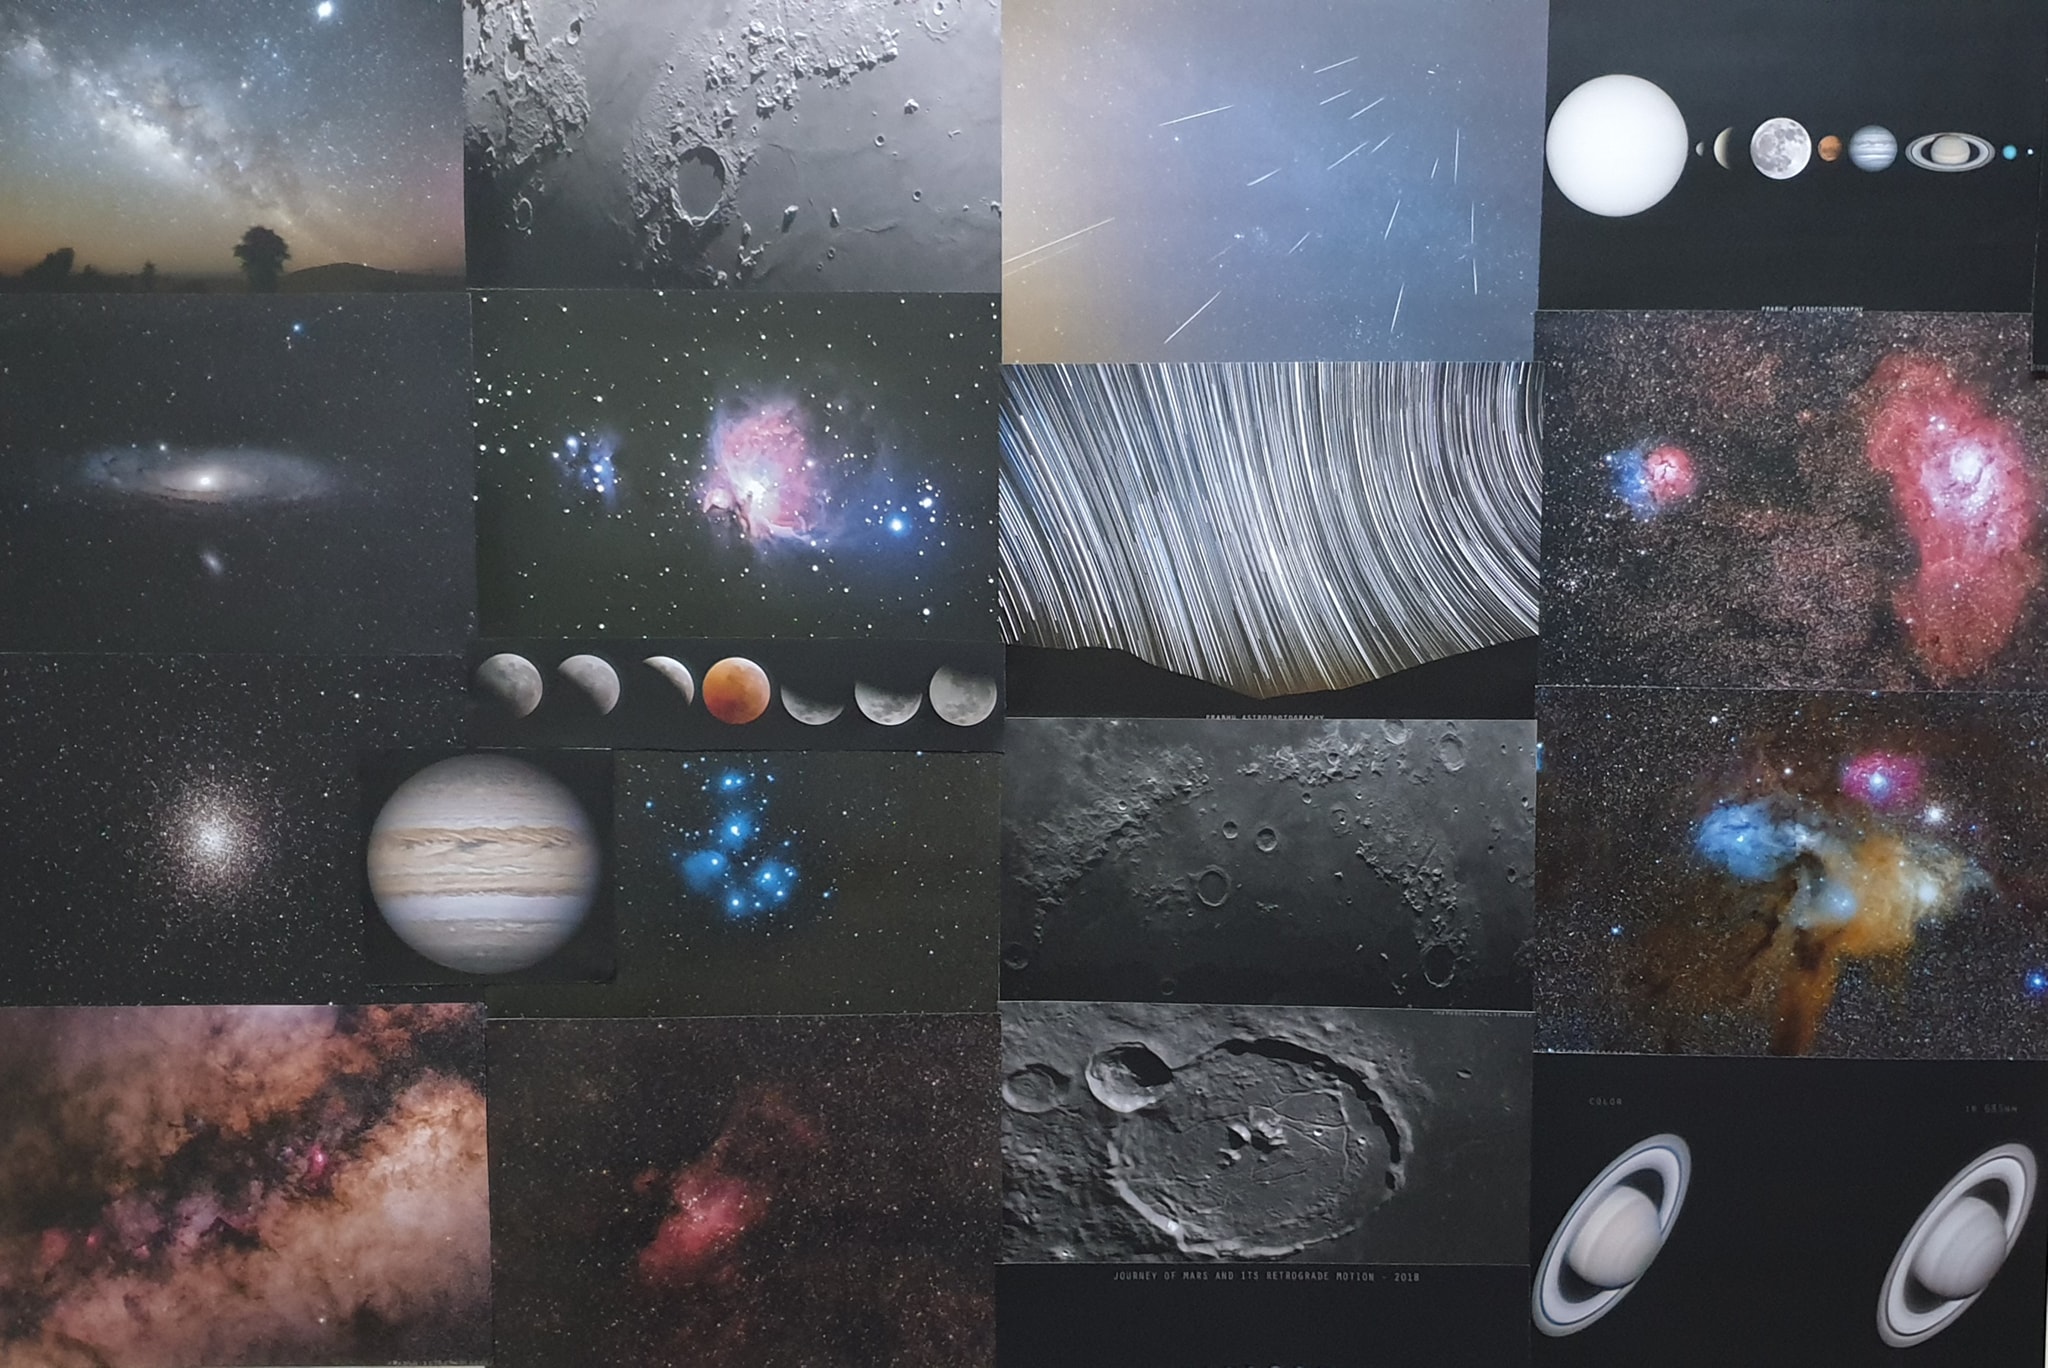 A collection of planets, galaxies, and nebulae imaged by Prabhu